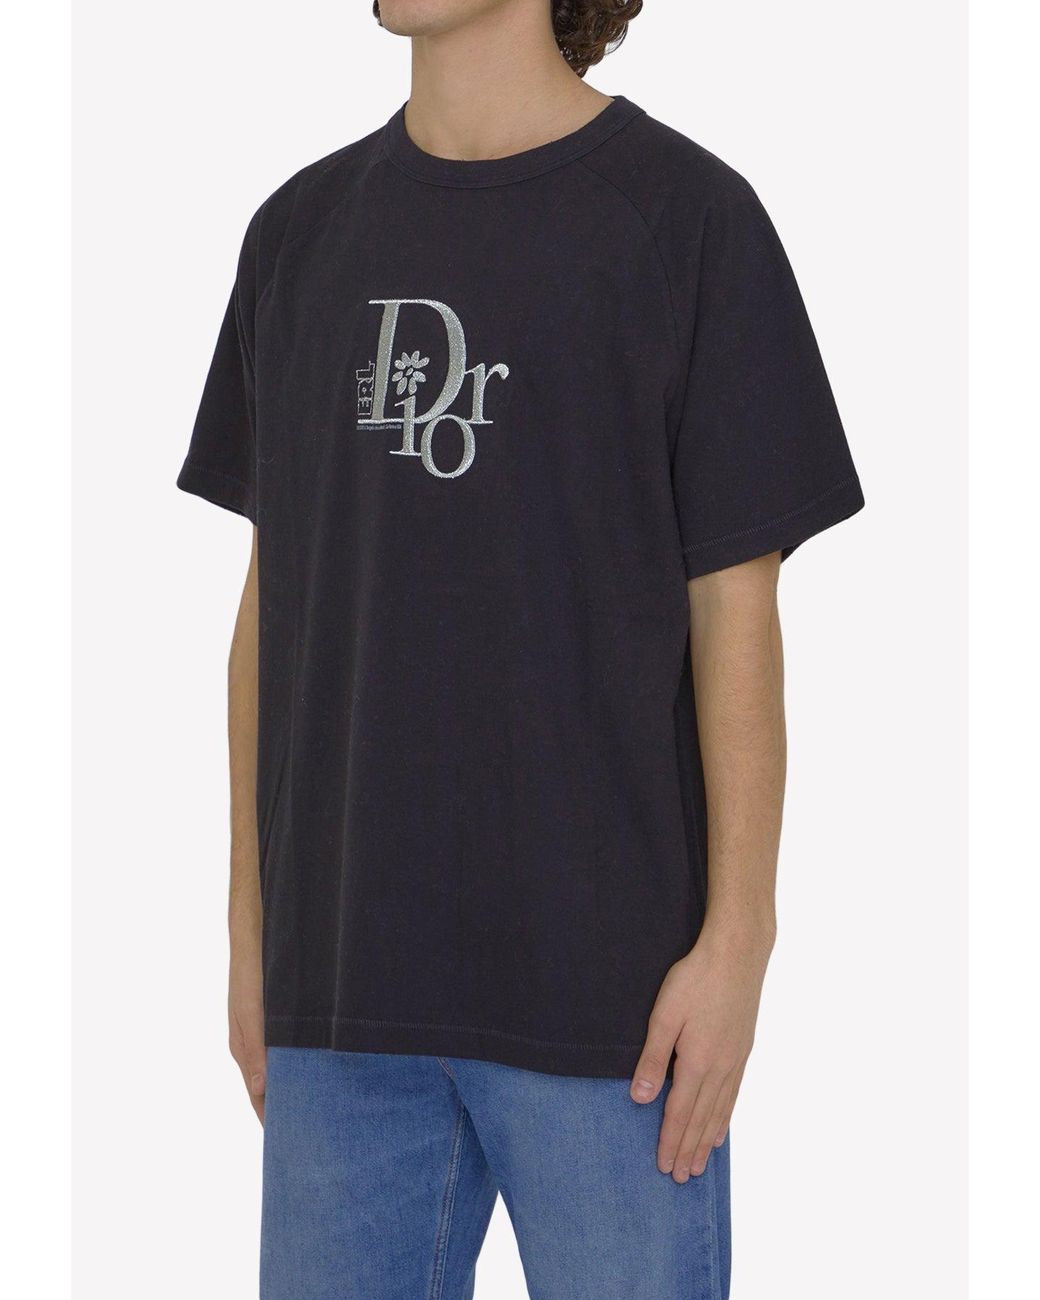 Dior X Erl Heathered Logo T-shirt in Black for Men | Lyst